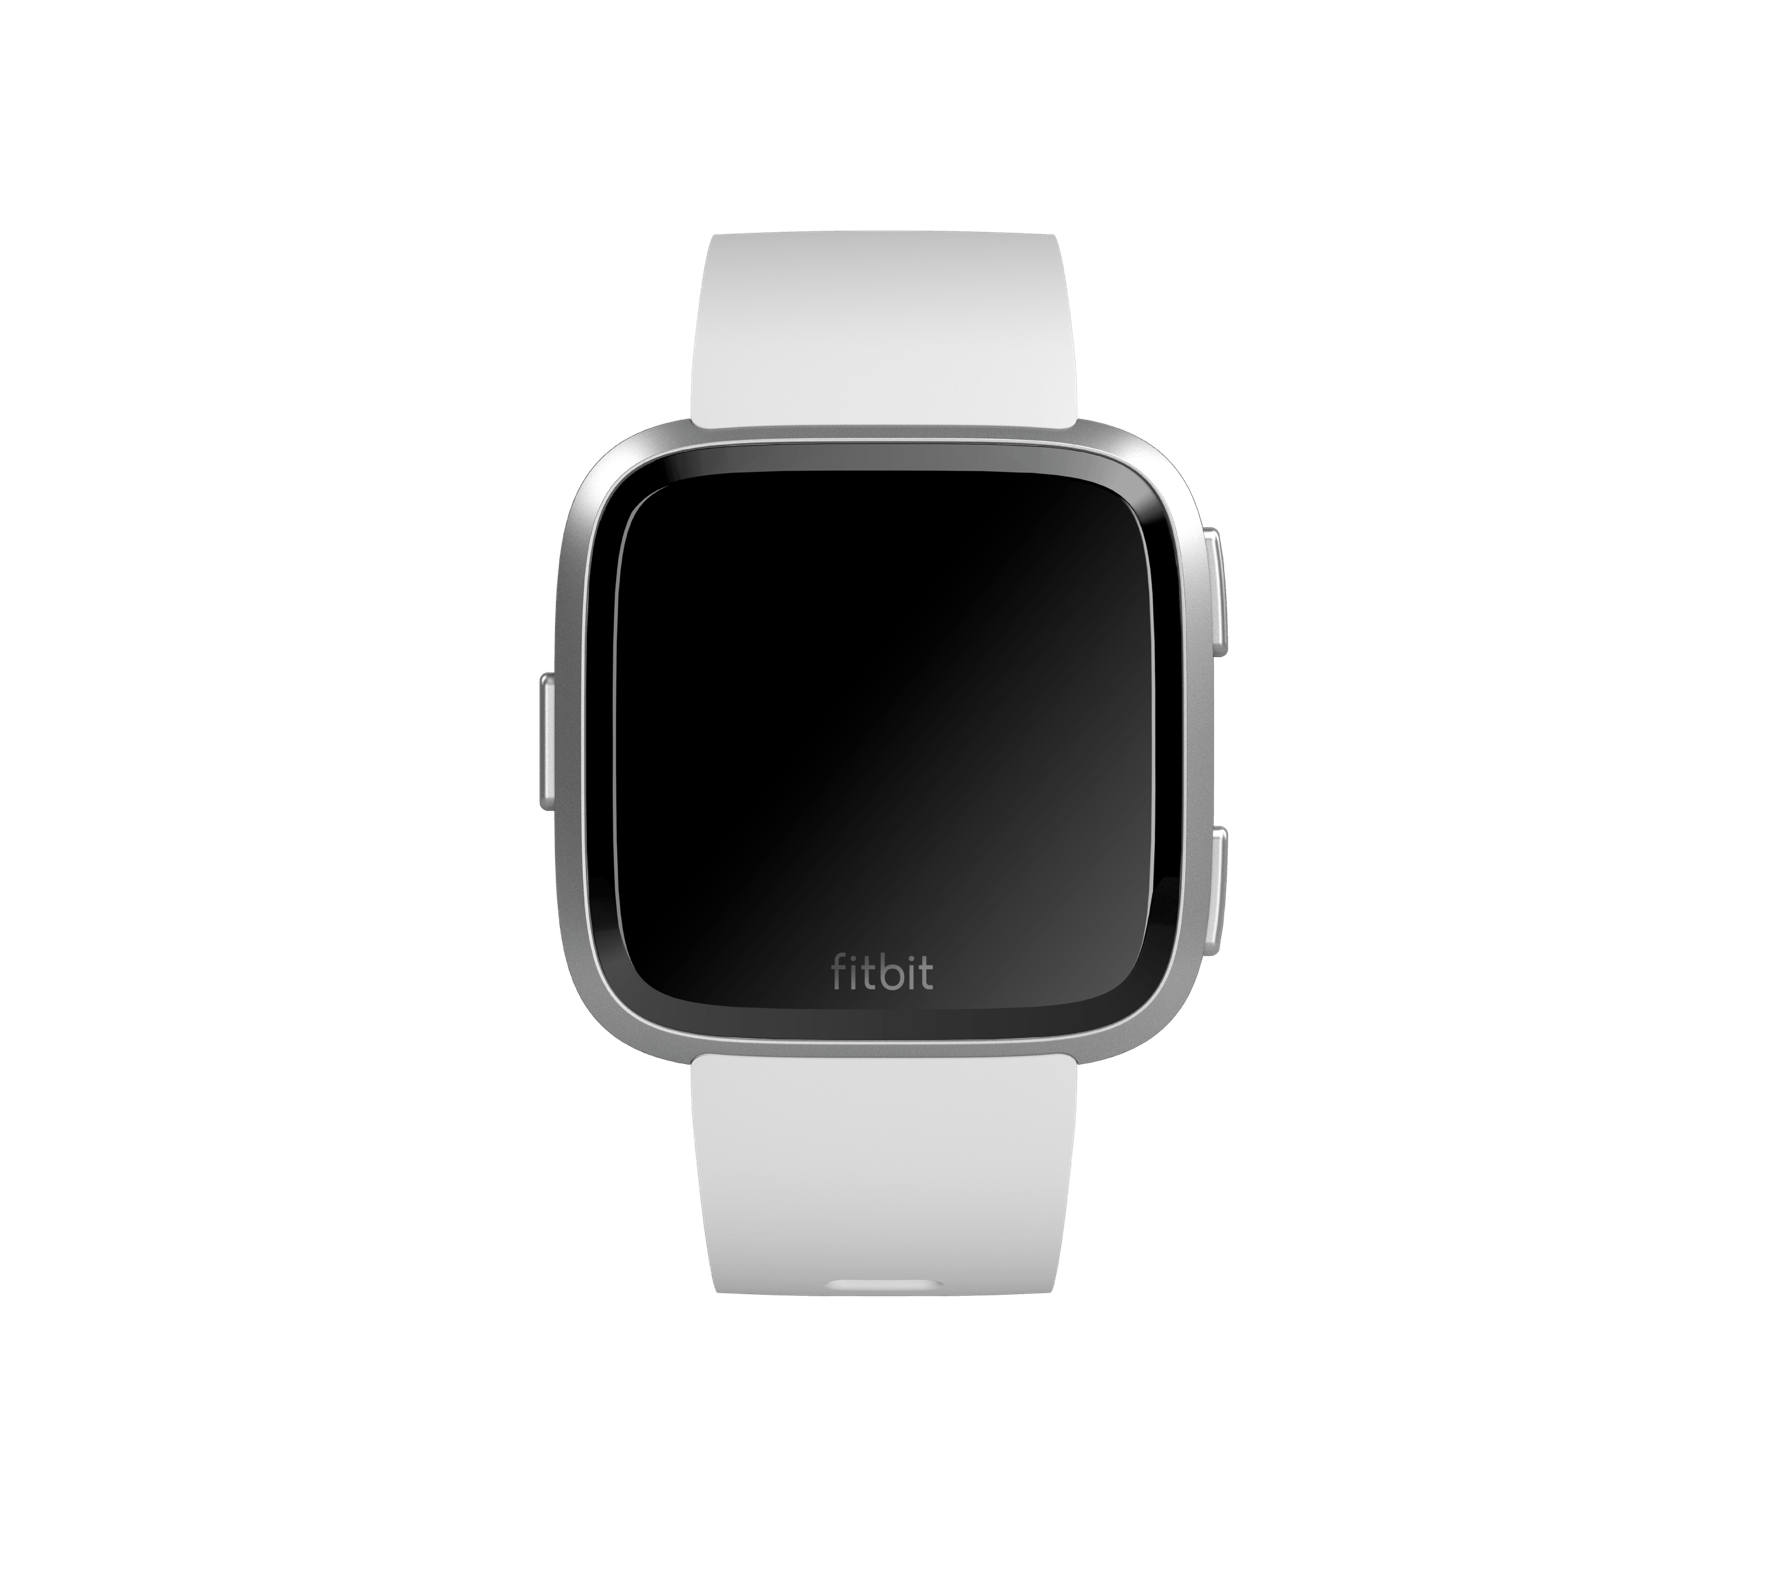 Fitbit Watch Officeworks | museosdelima.com